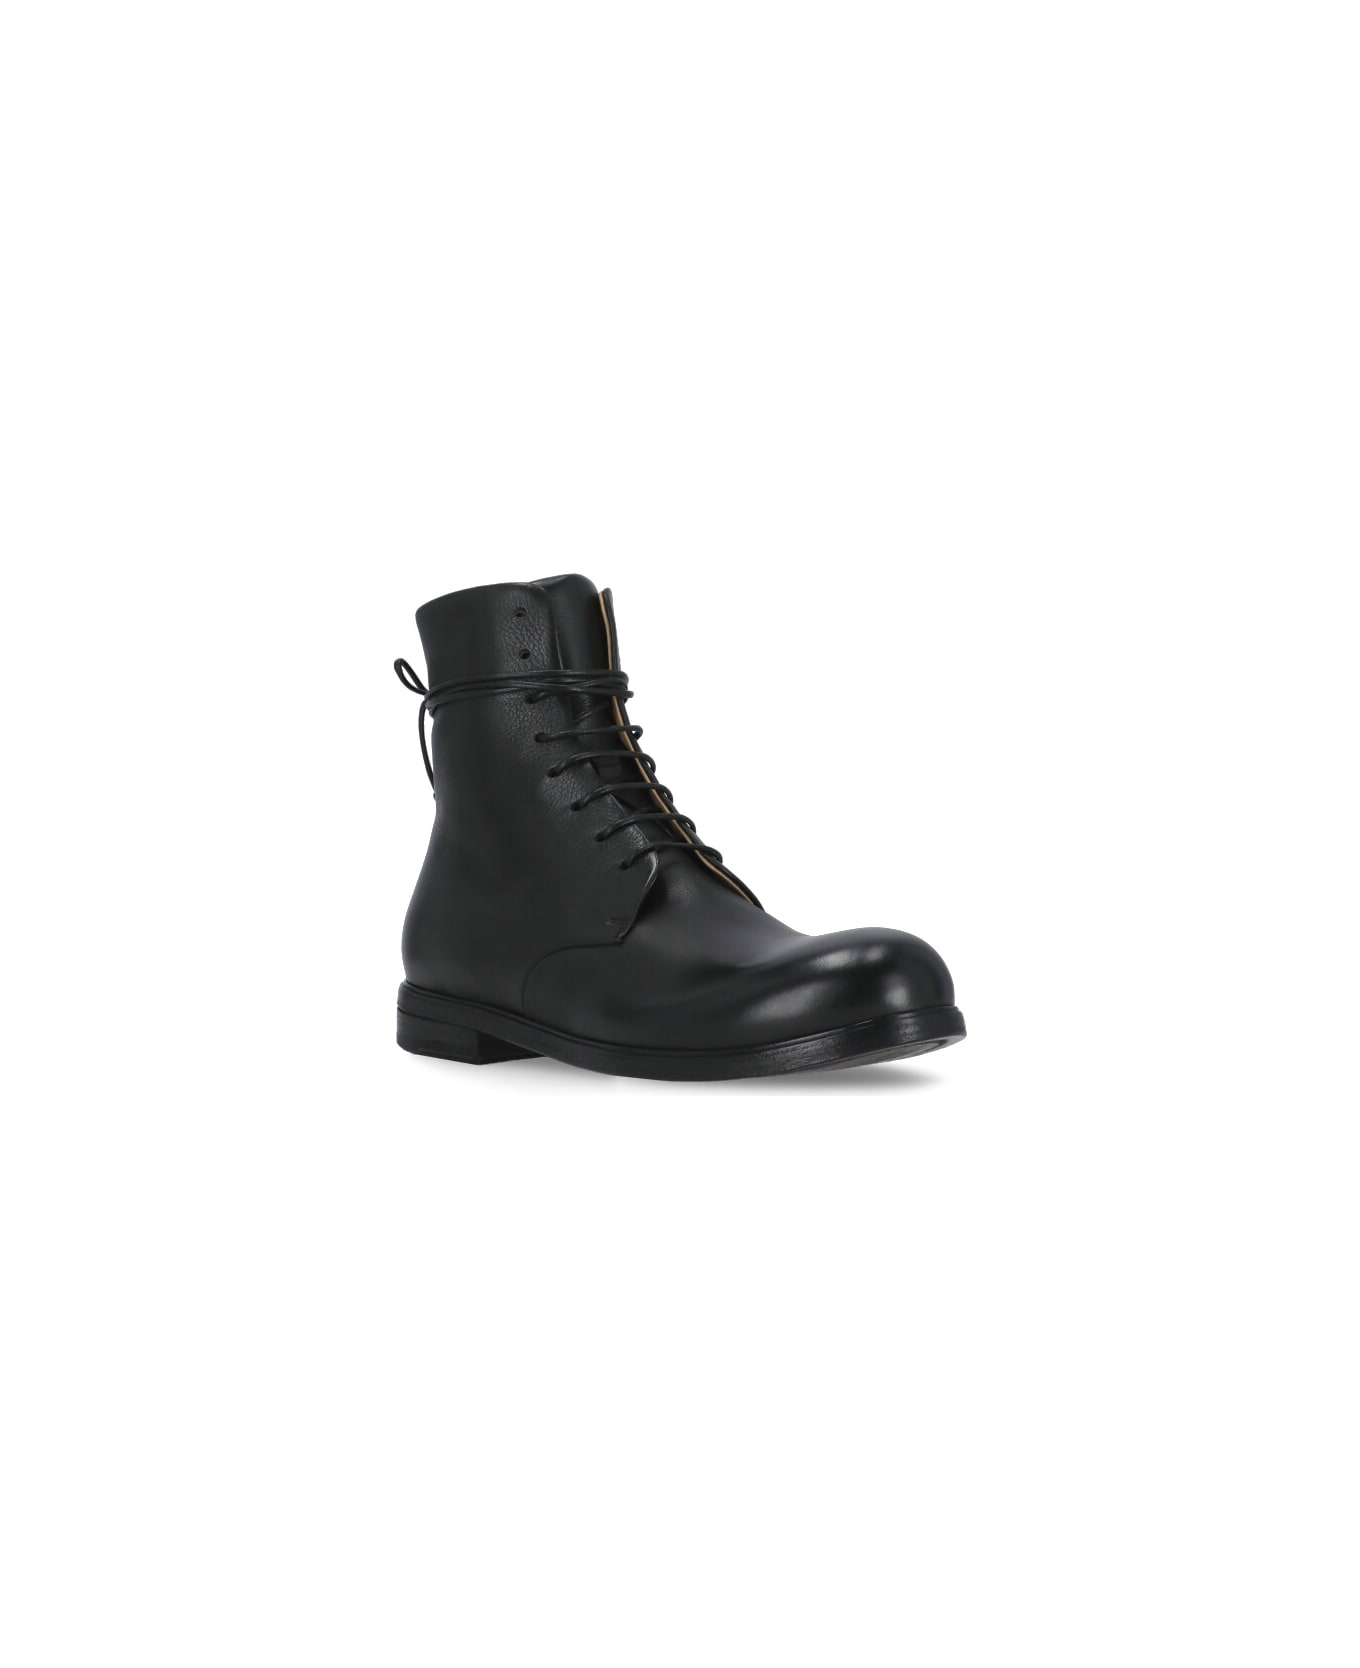 Marsell Zucca Ankle Boots - Black ブーツ